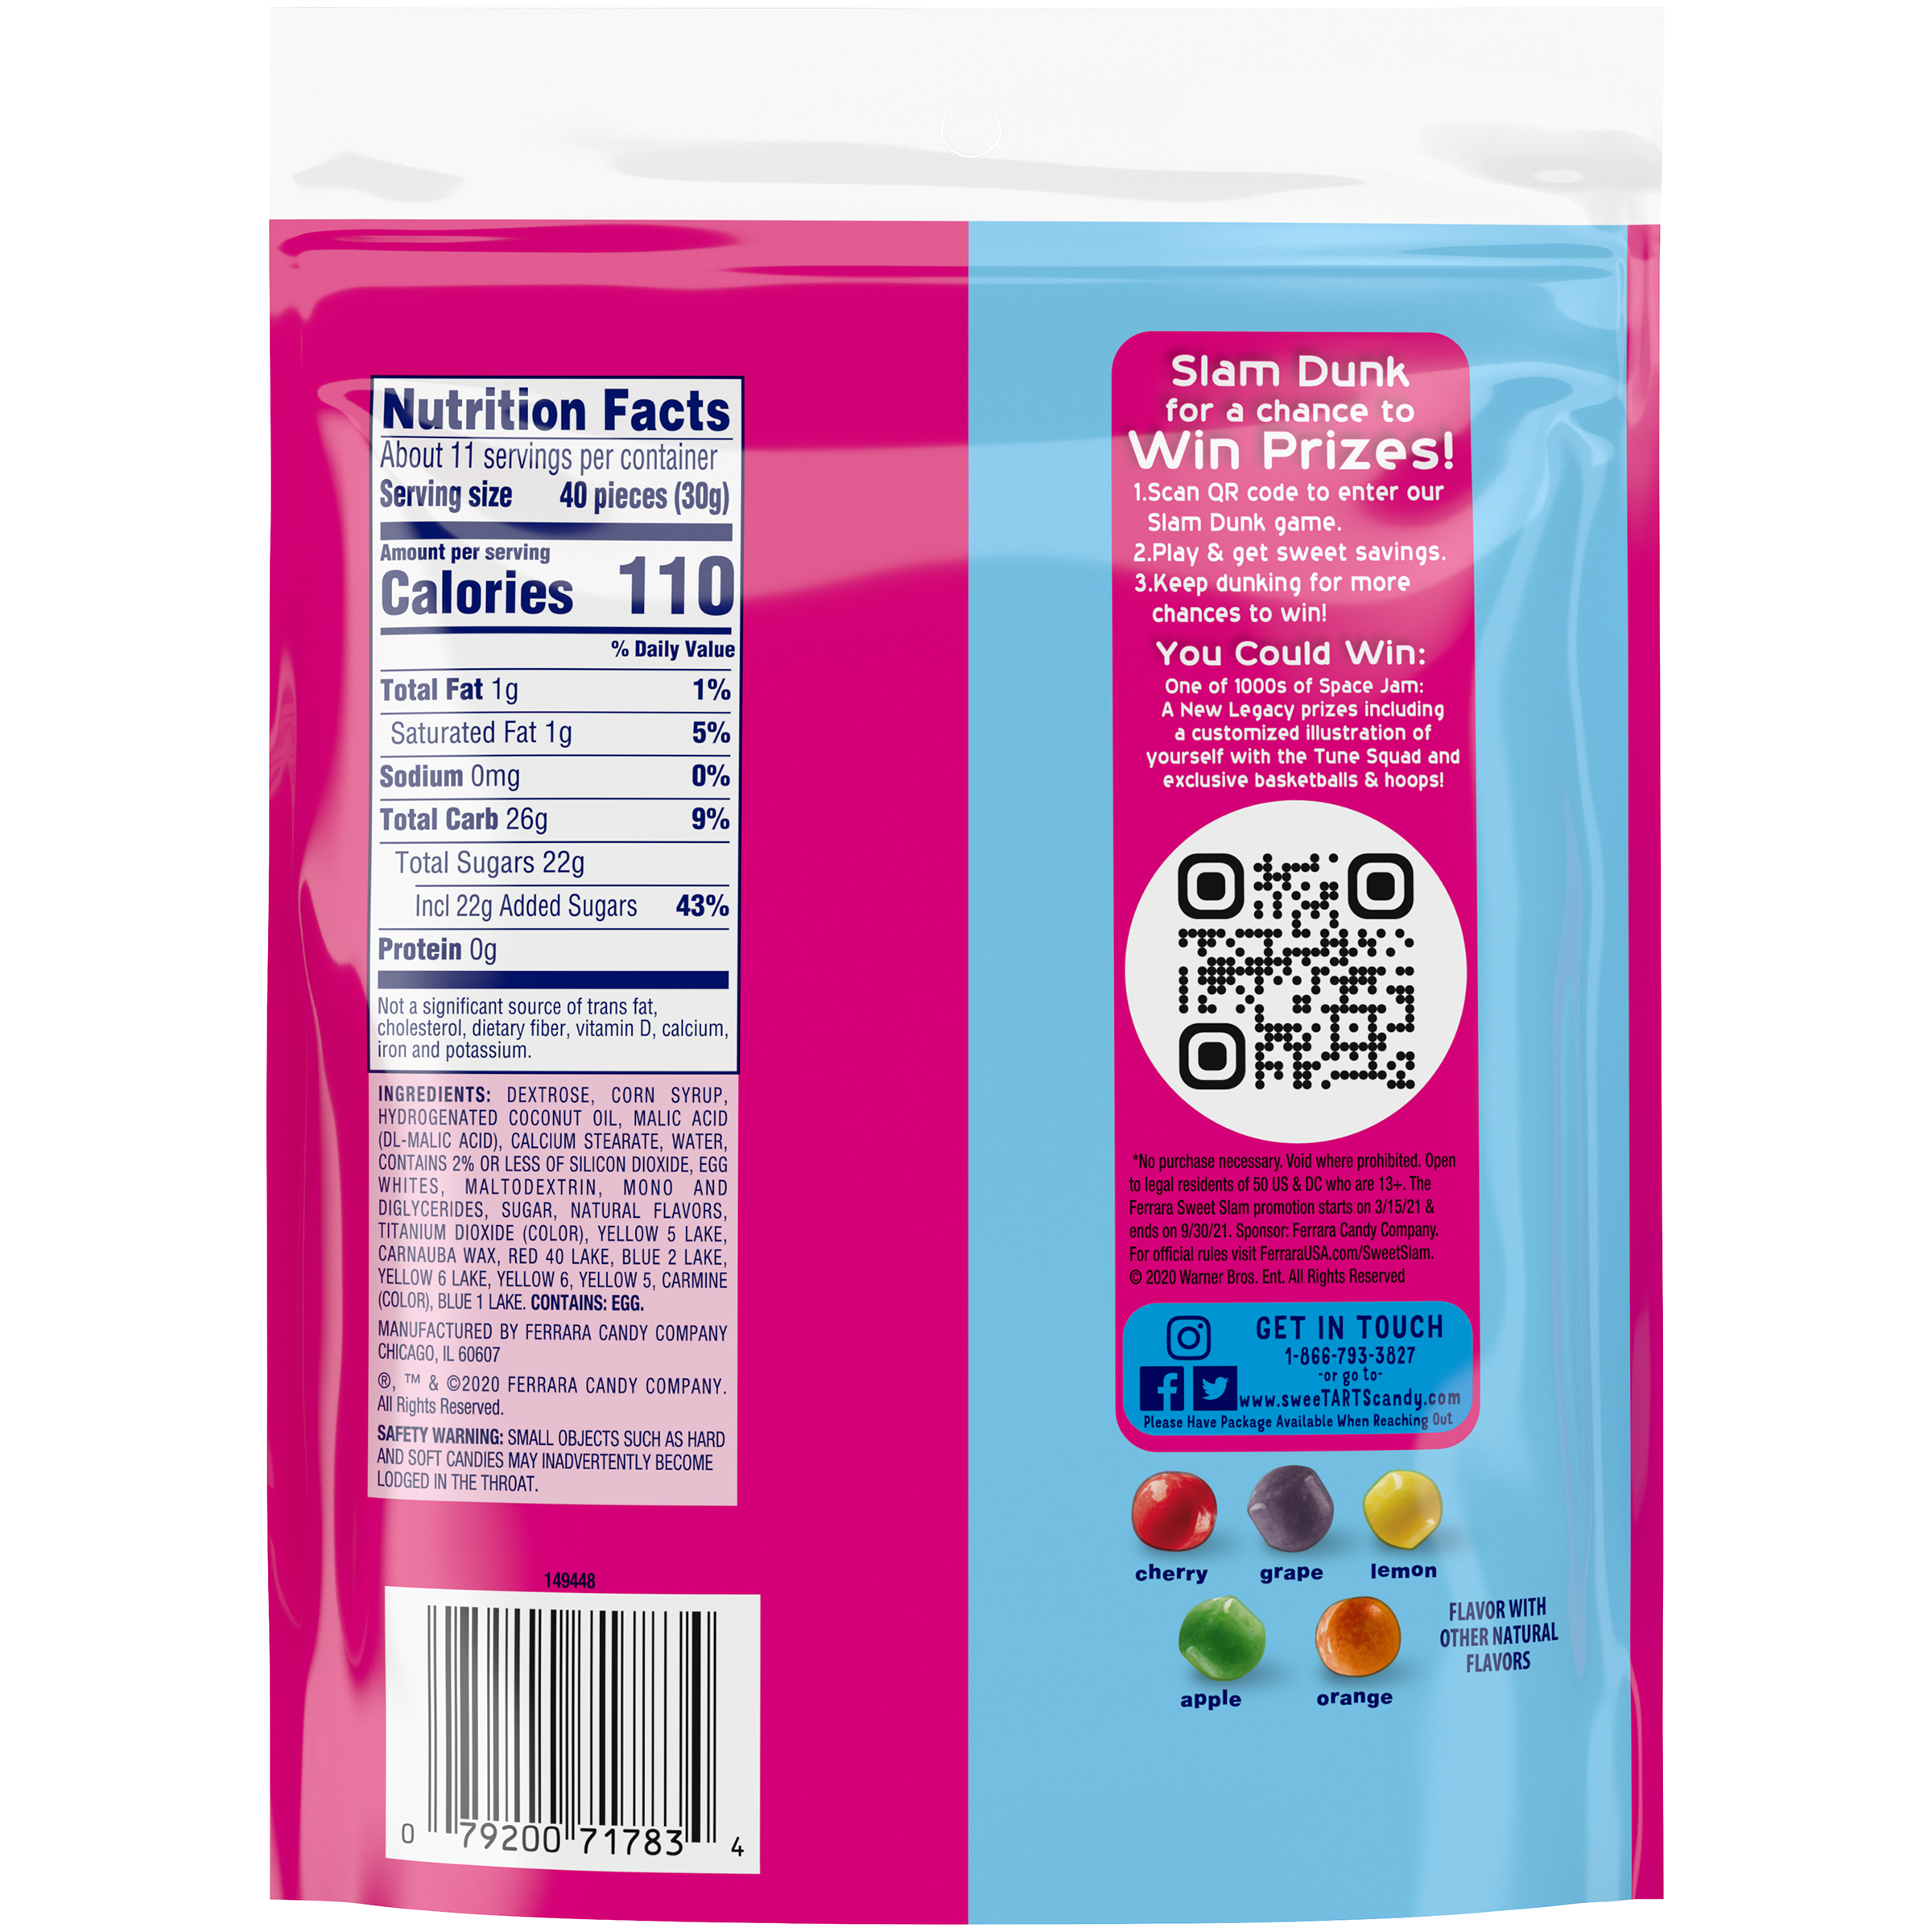 SweeTARTS Mini Chewy Candy, Mixed Fruit Flavored, 12 oz - image 3 of 7